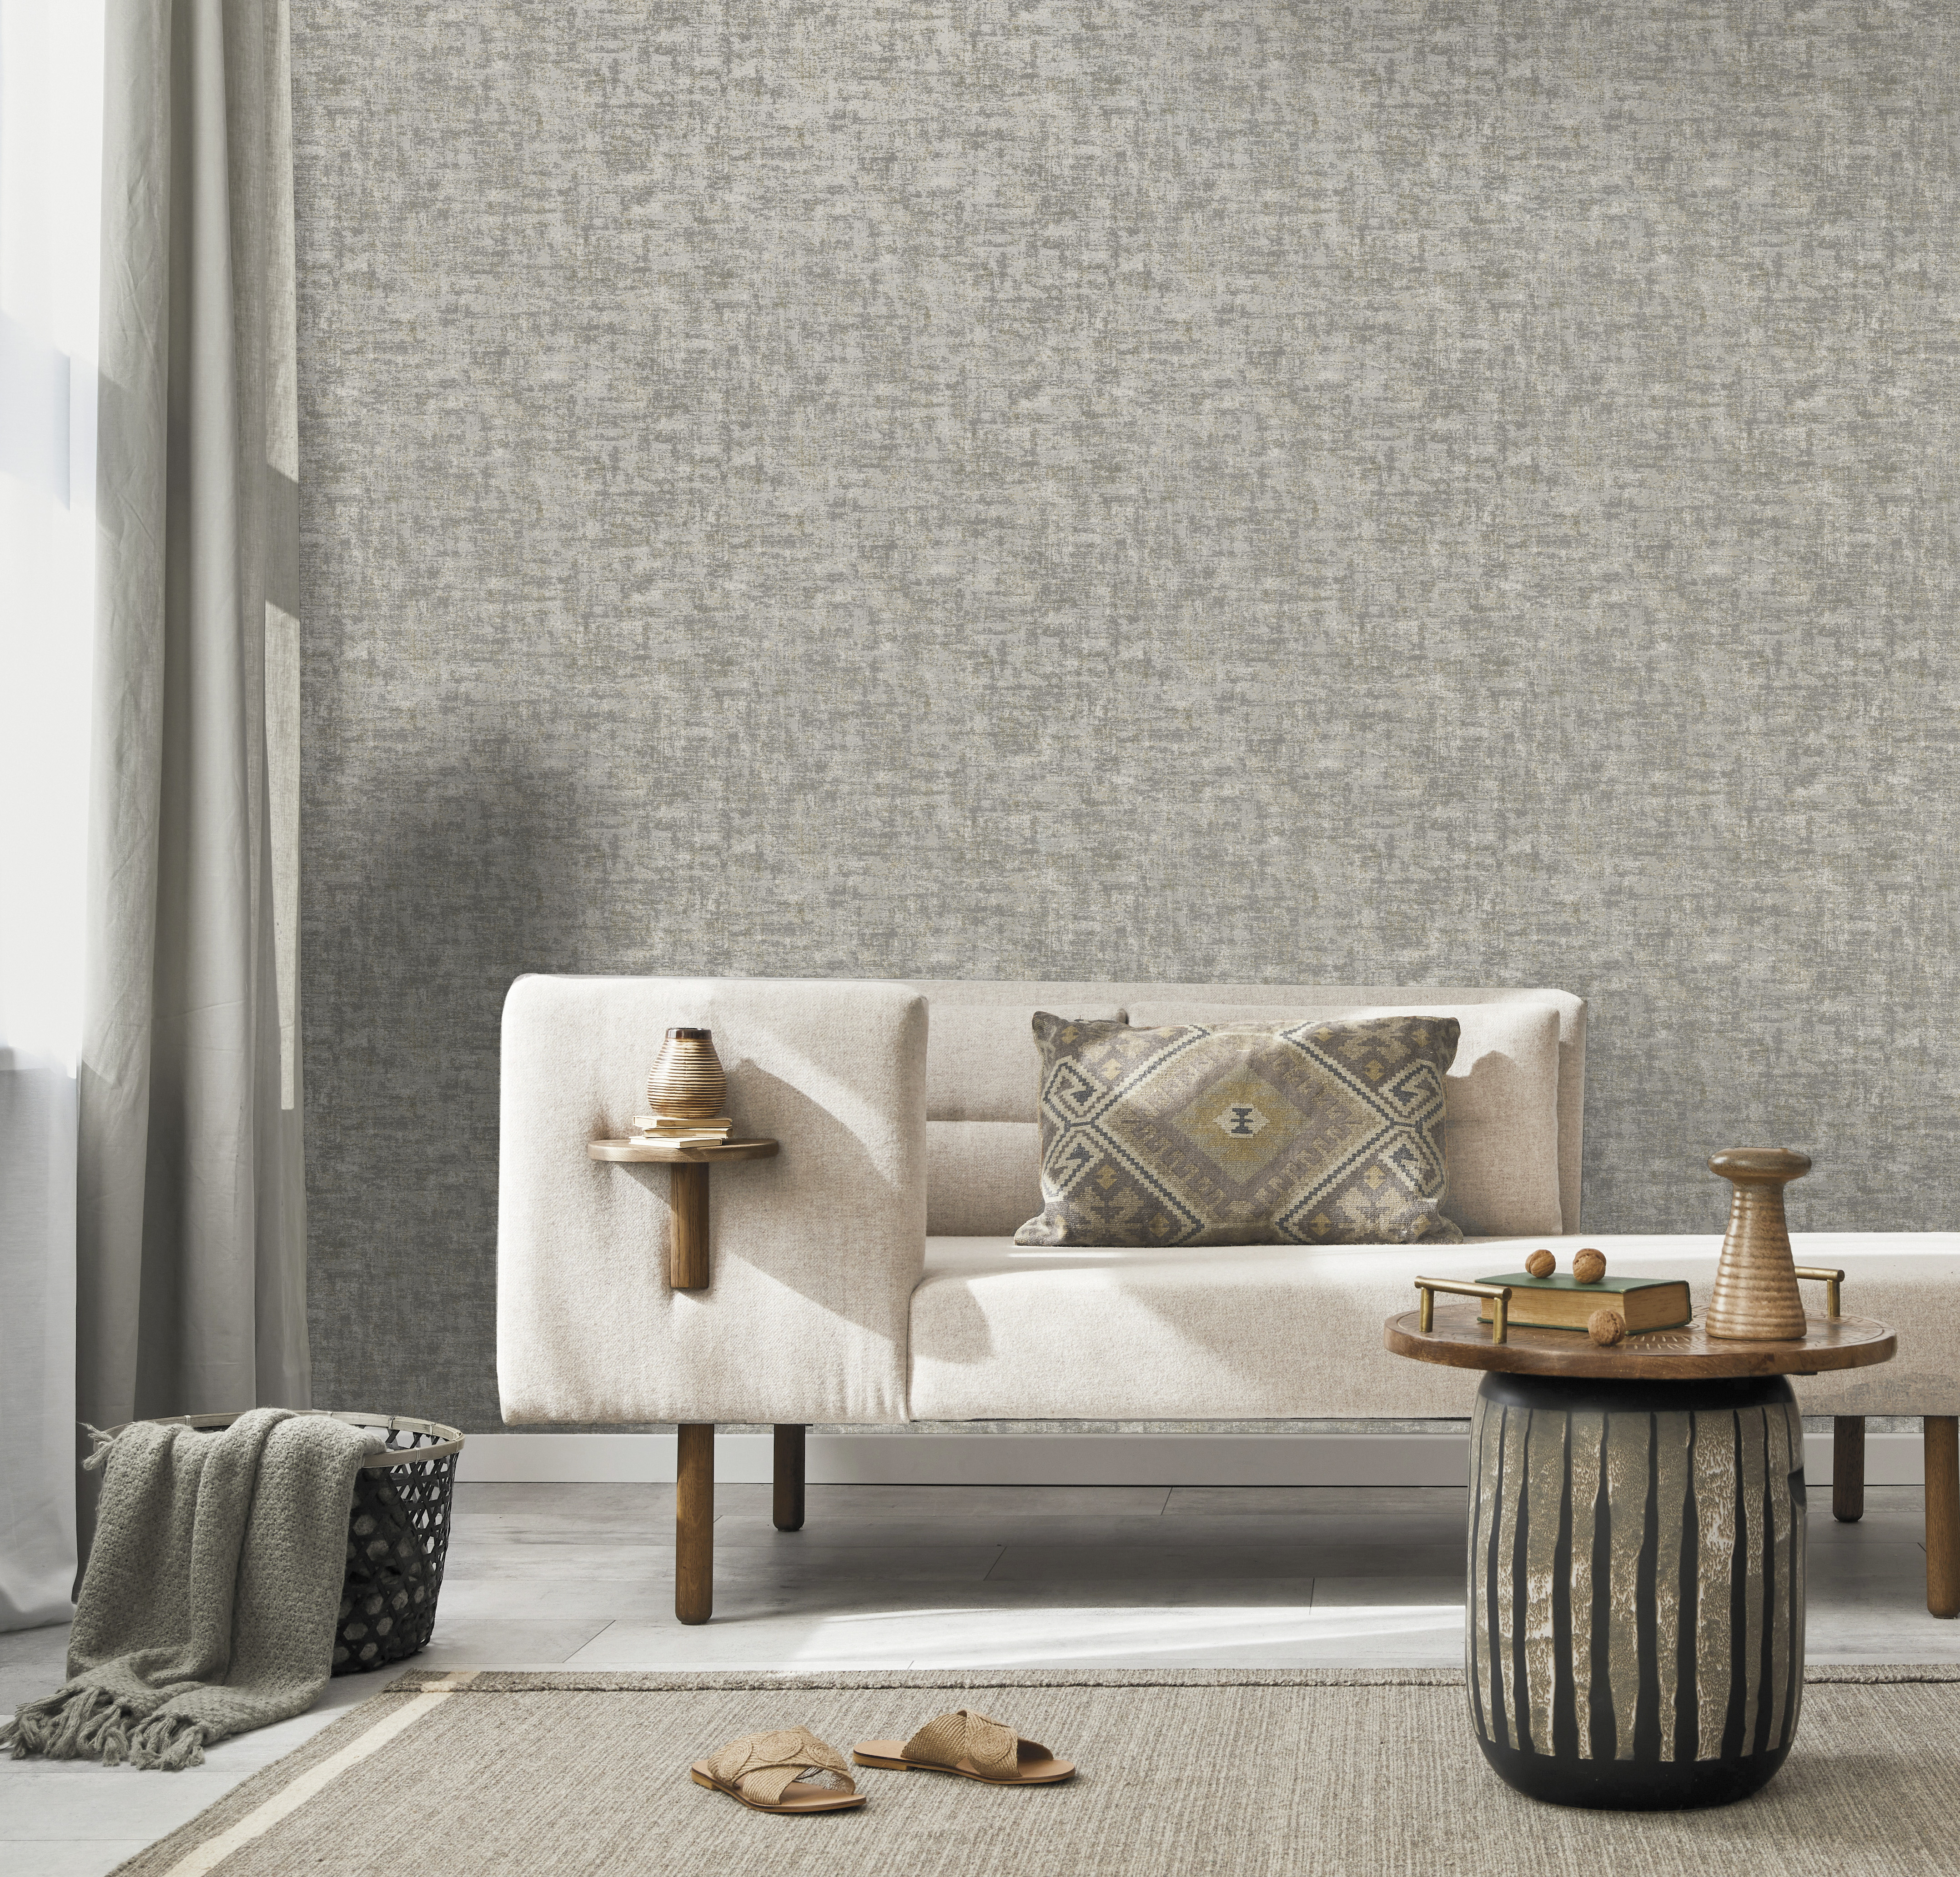 Image of Holden Decor Brindle Bead Texture Grey & Silver Wallpaper - 10.05m x 53cm